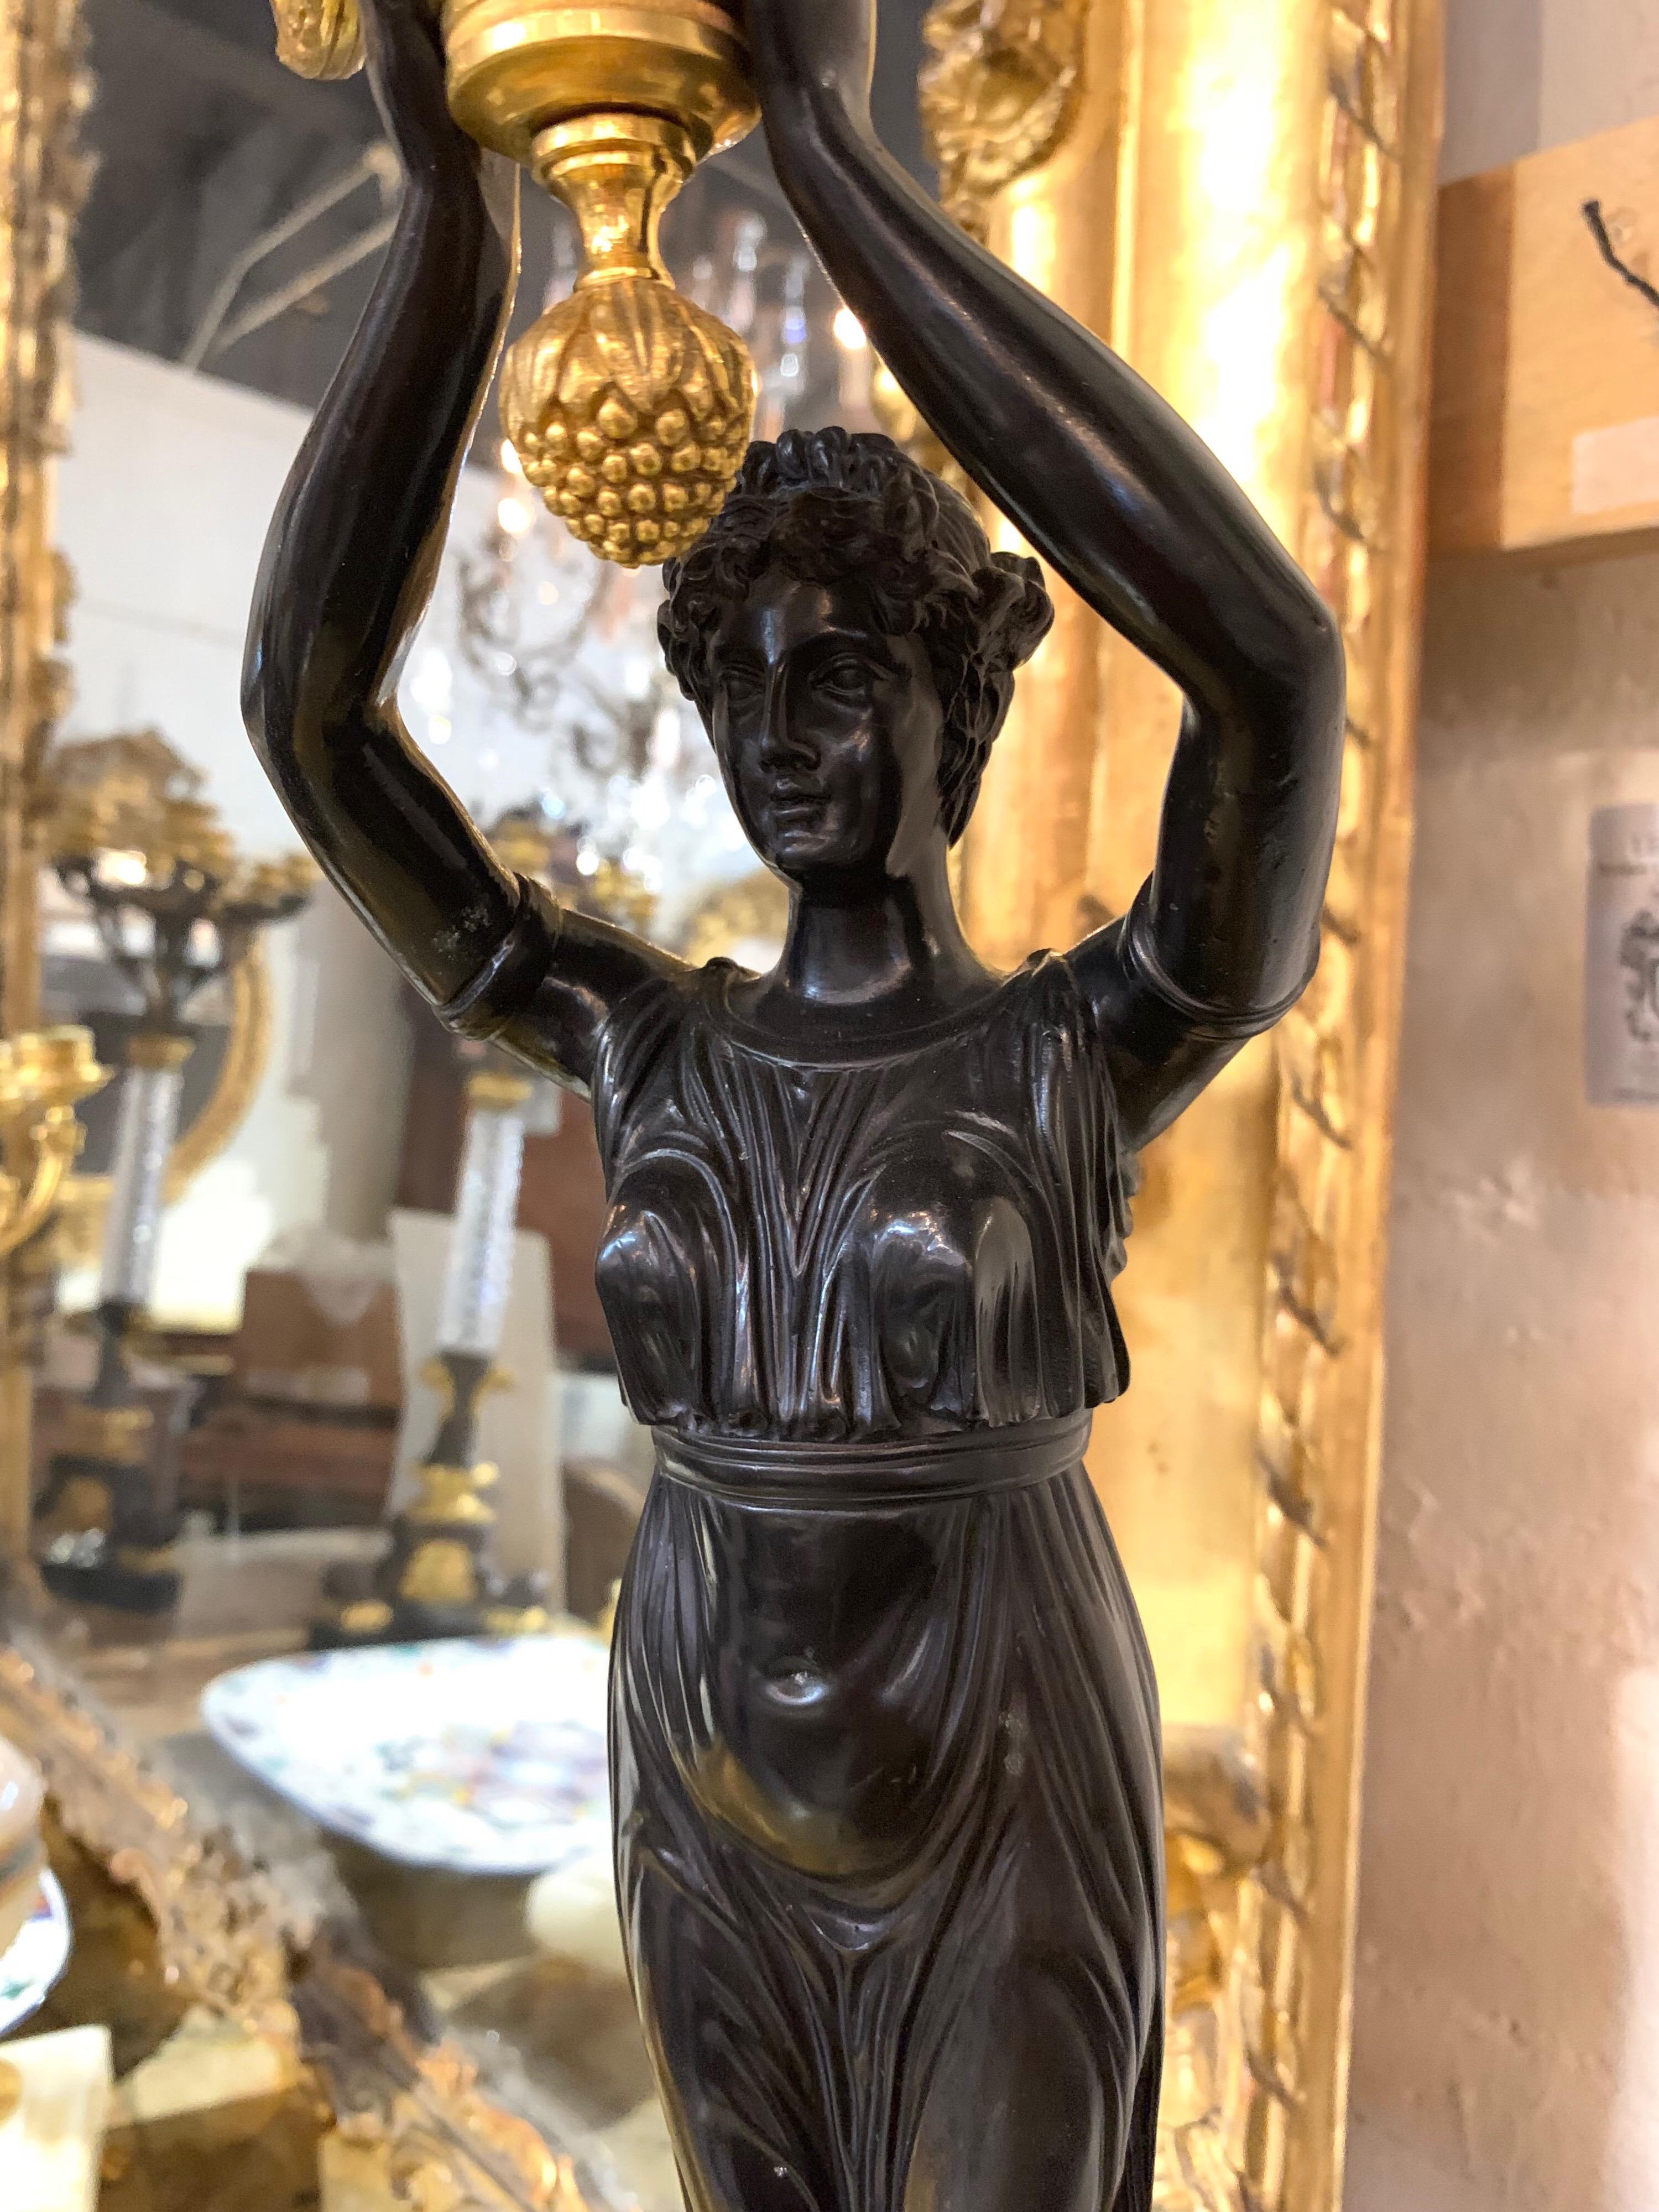 Exquisite pair of French gilt bronze figural candelabras. Beautiful gilt stand with a female goddess like figure holding up the candelabra. Each candelabra has a place for nine candles. What a statement these would make!